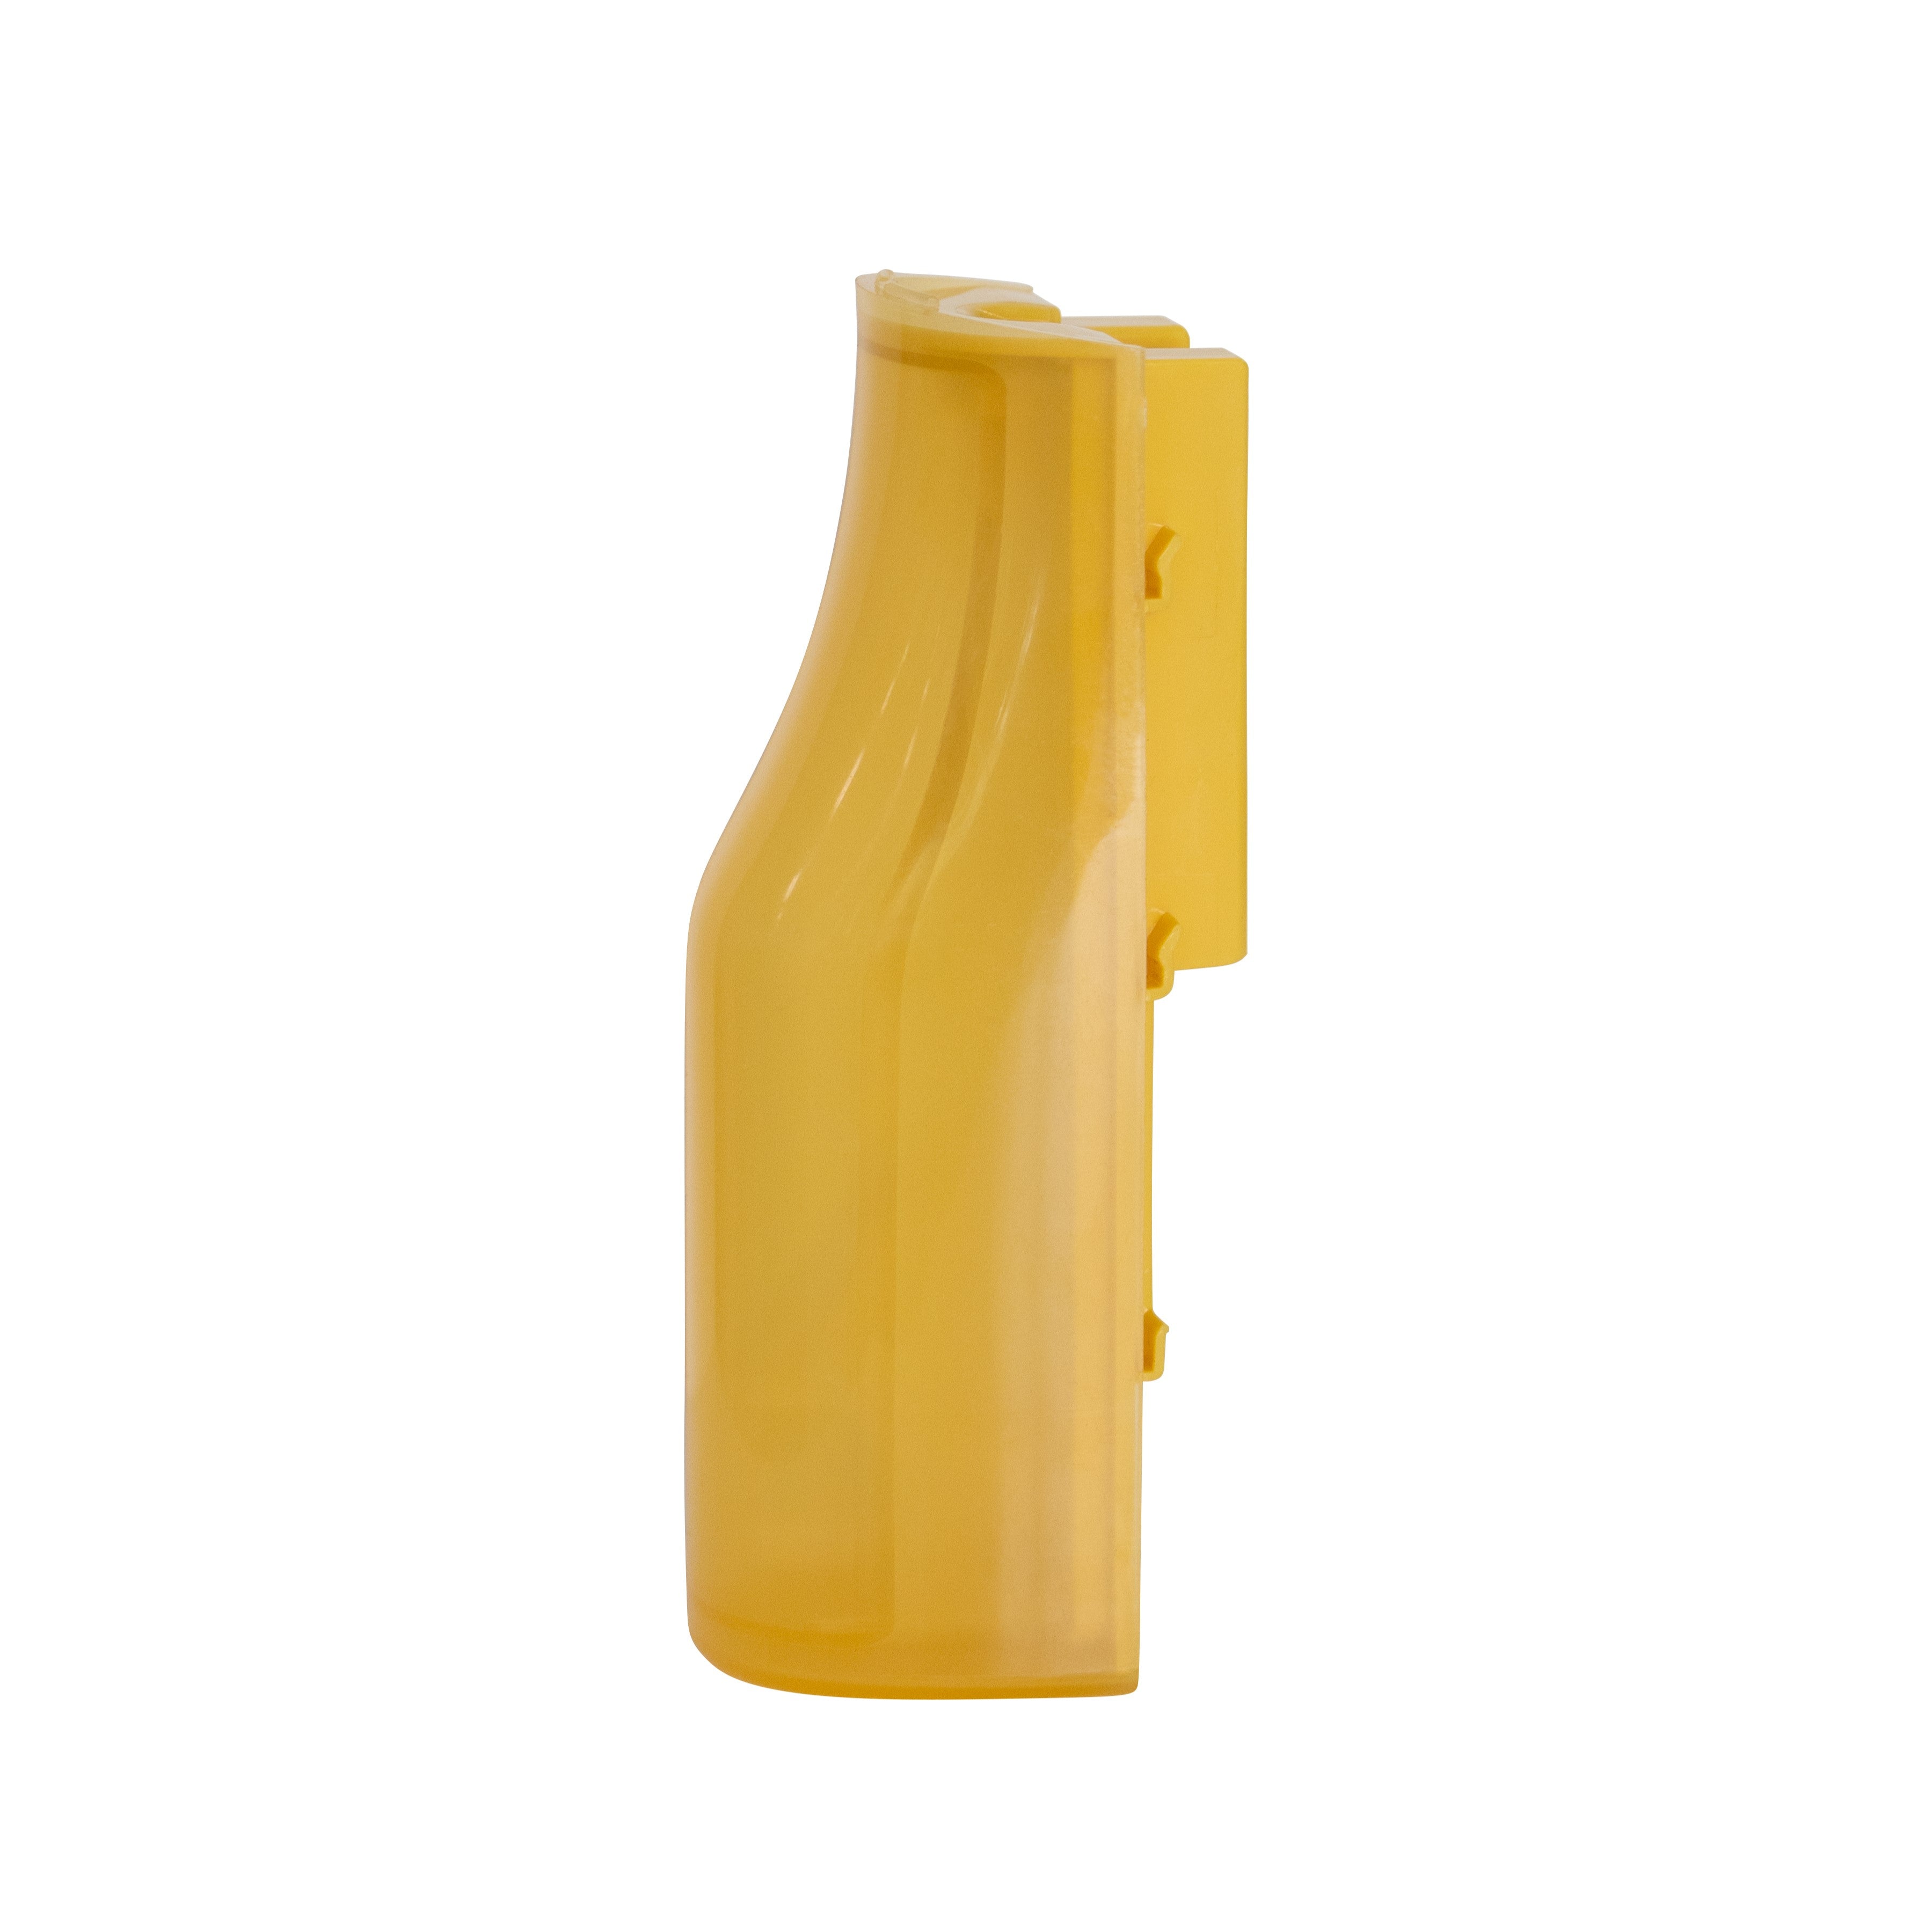 Tefal Pure Pop Replacement Part - Sunshine Yellow Removable Tank - SS9100051700